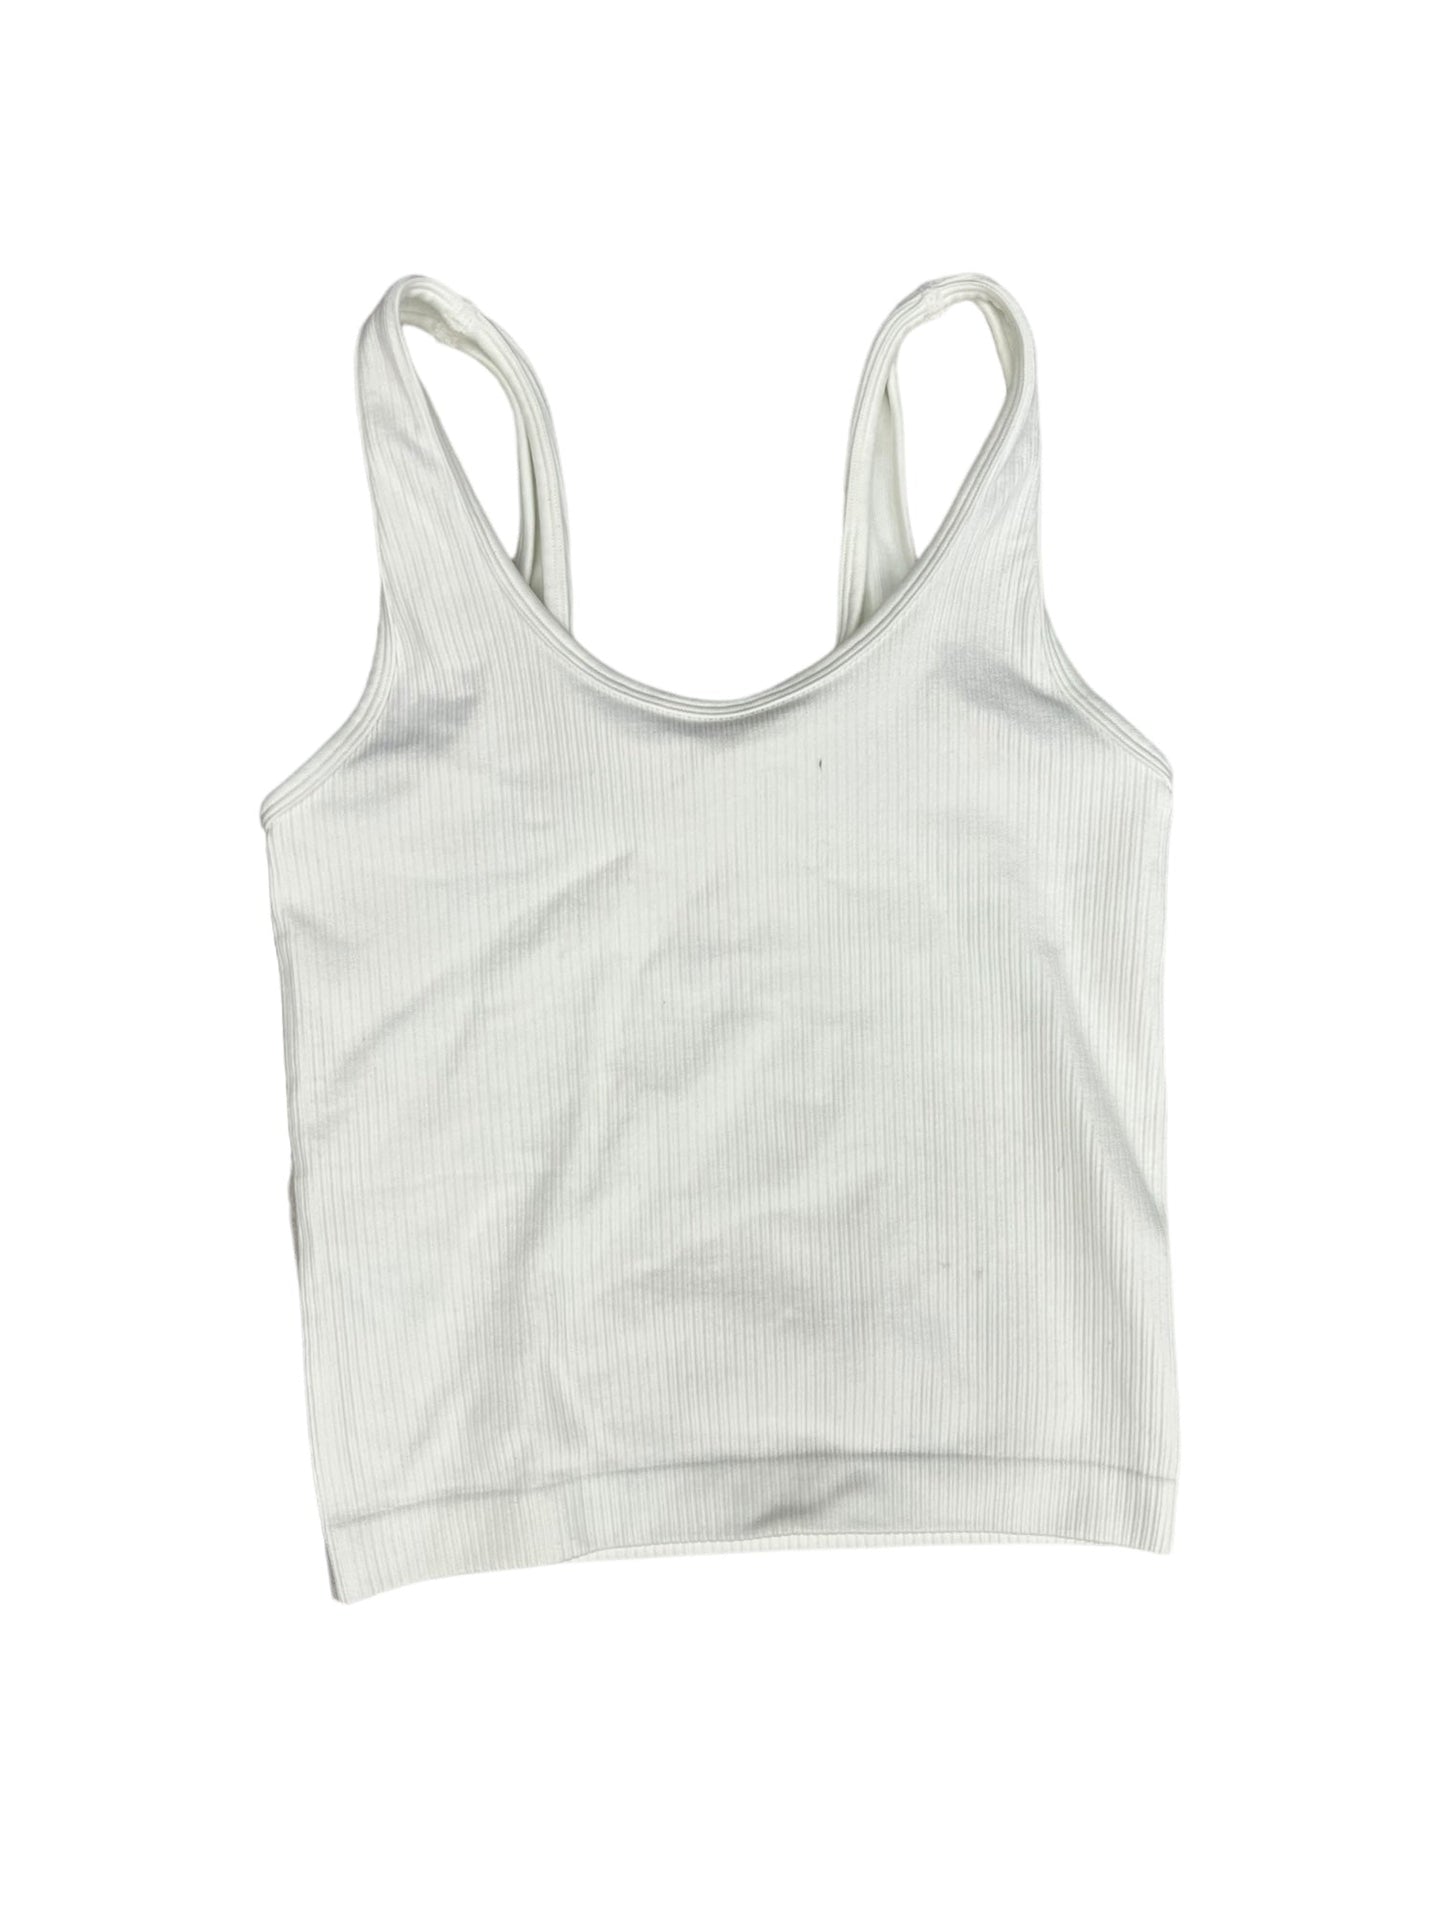 White Athletic Tank Top A New Day, Size S